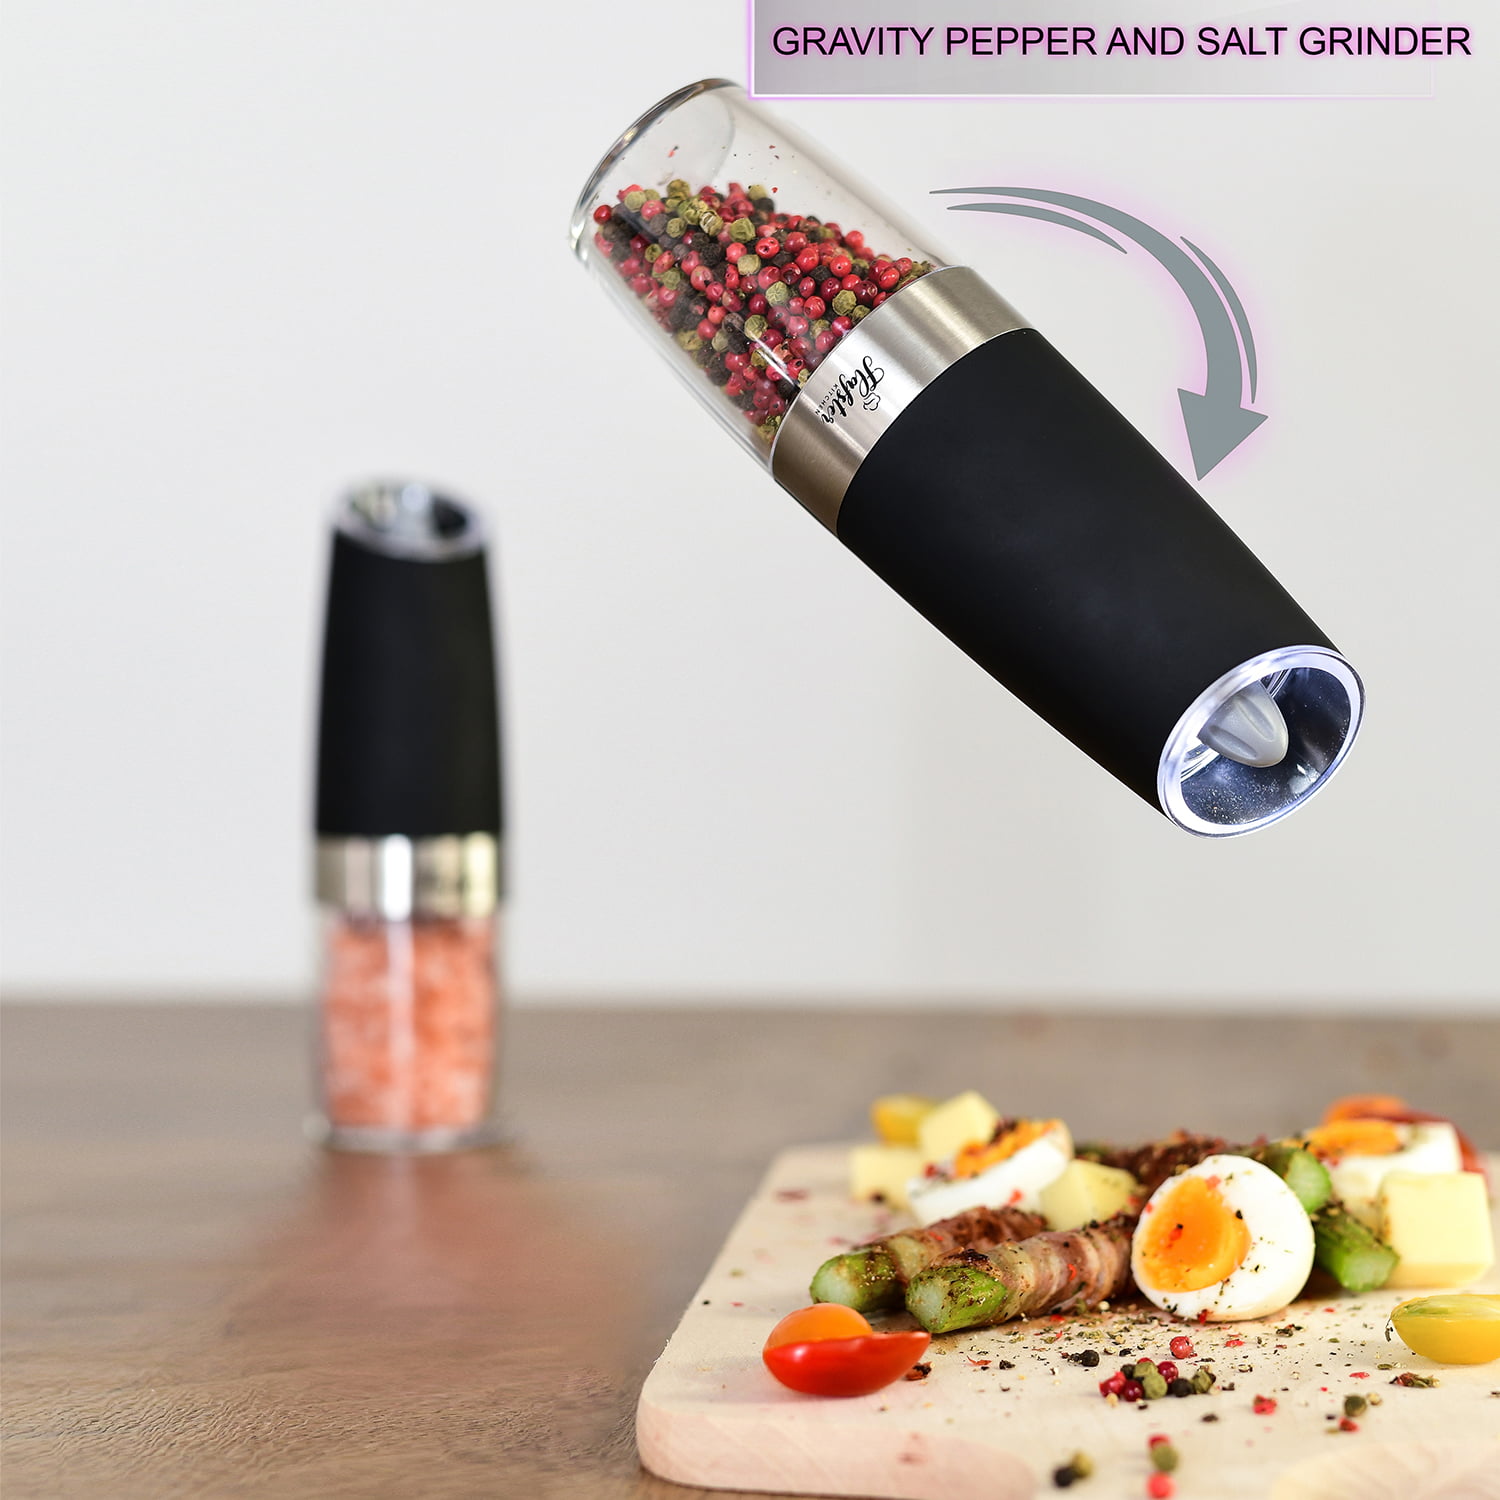 Flafster Kitchen Stainless Steel Battery Operated Electric Salt